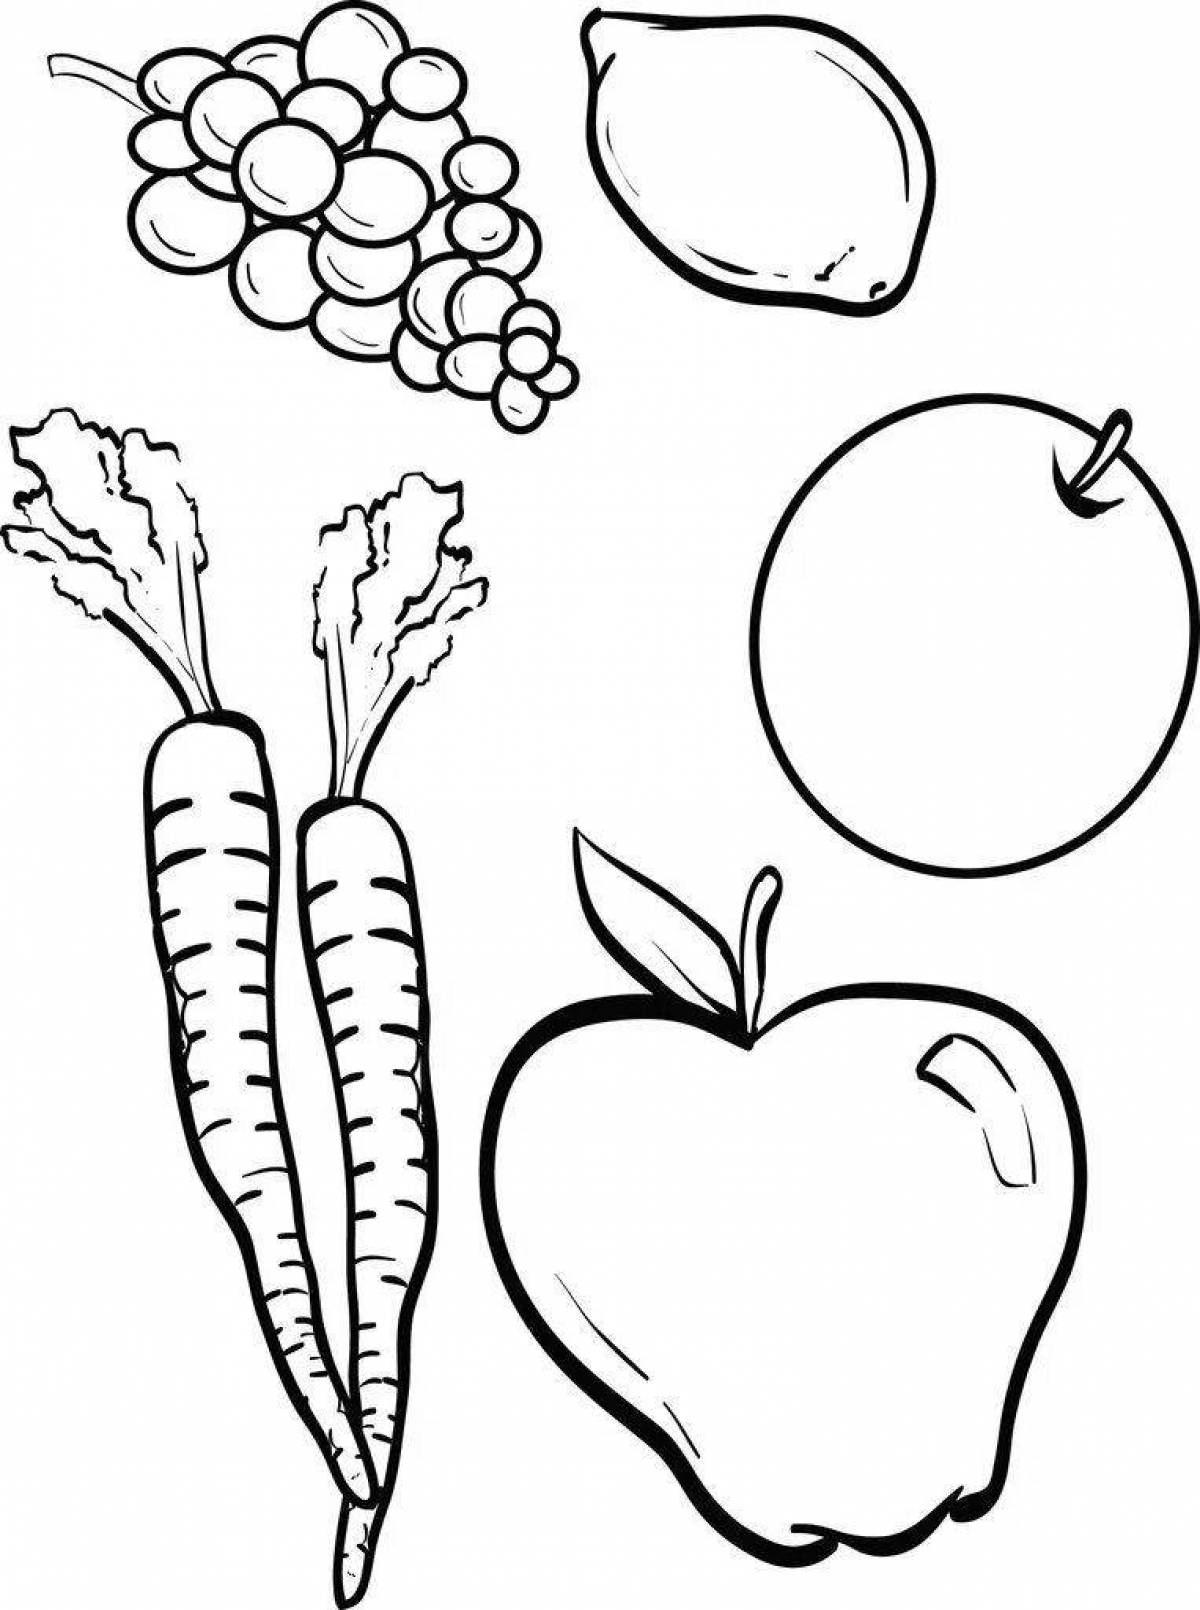 Joyful vegetable and fruit coloring page